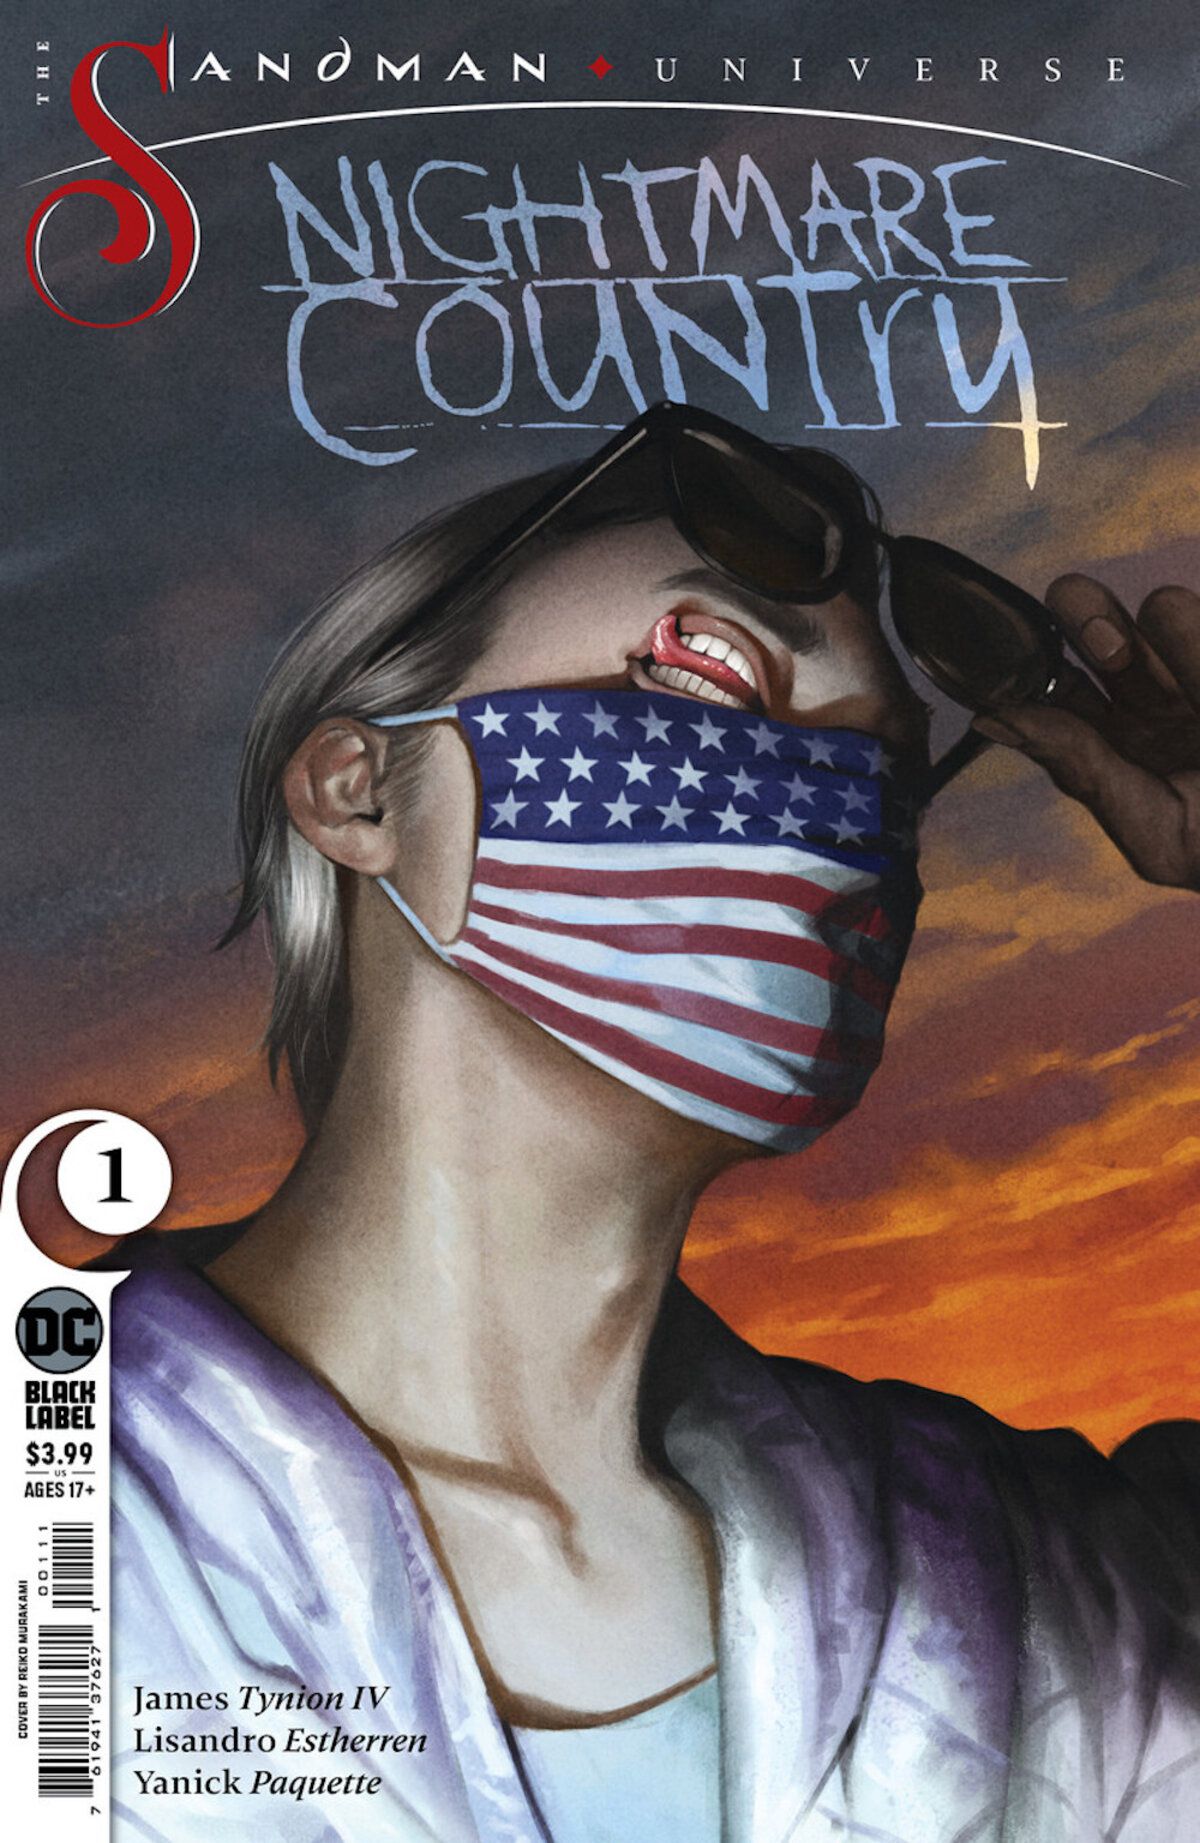 The cover of Nightmare Country #1 (2022) showing The Corinthian wearing an American flag mask, raising his sunglasses to reveal he has a mouth for his eyes.